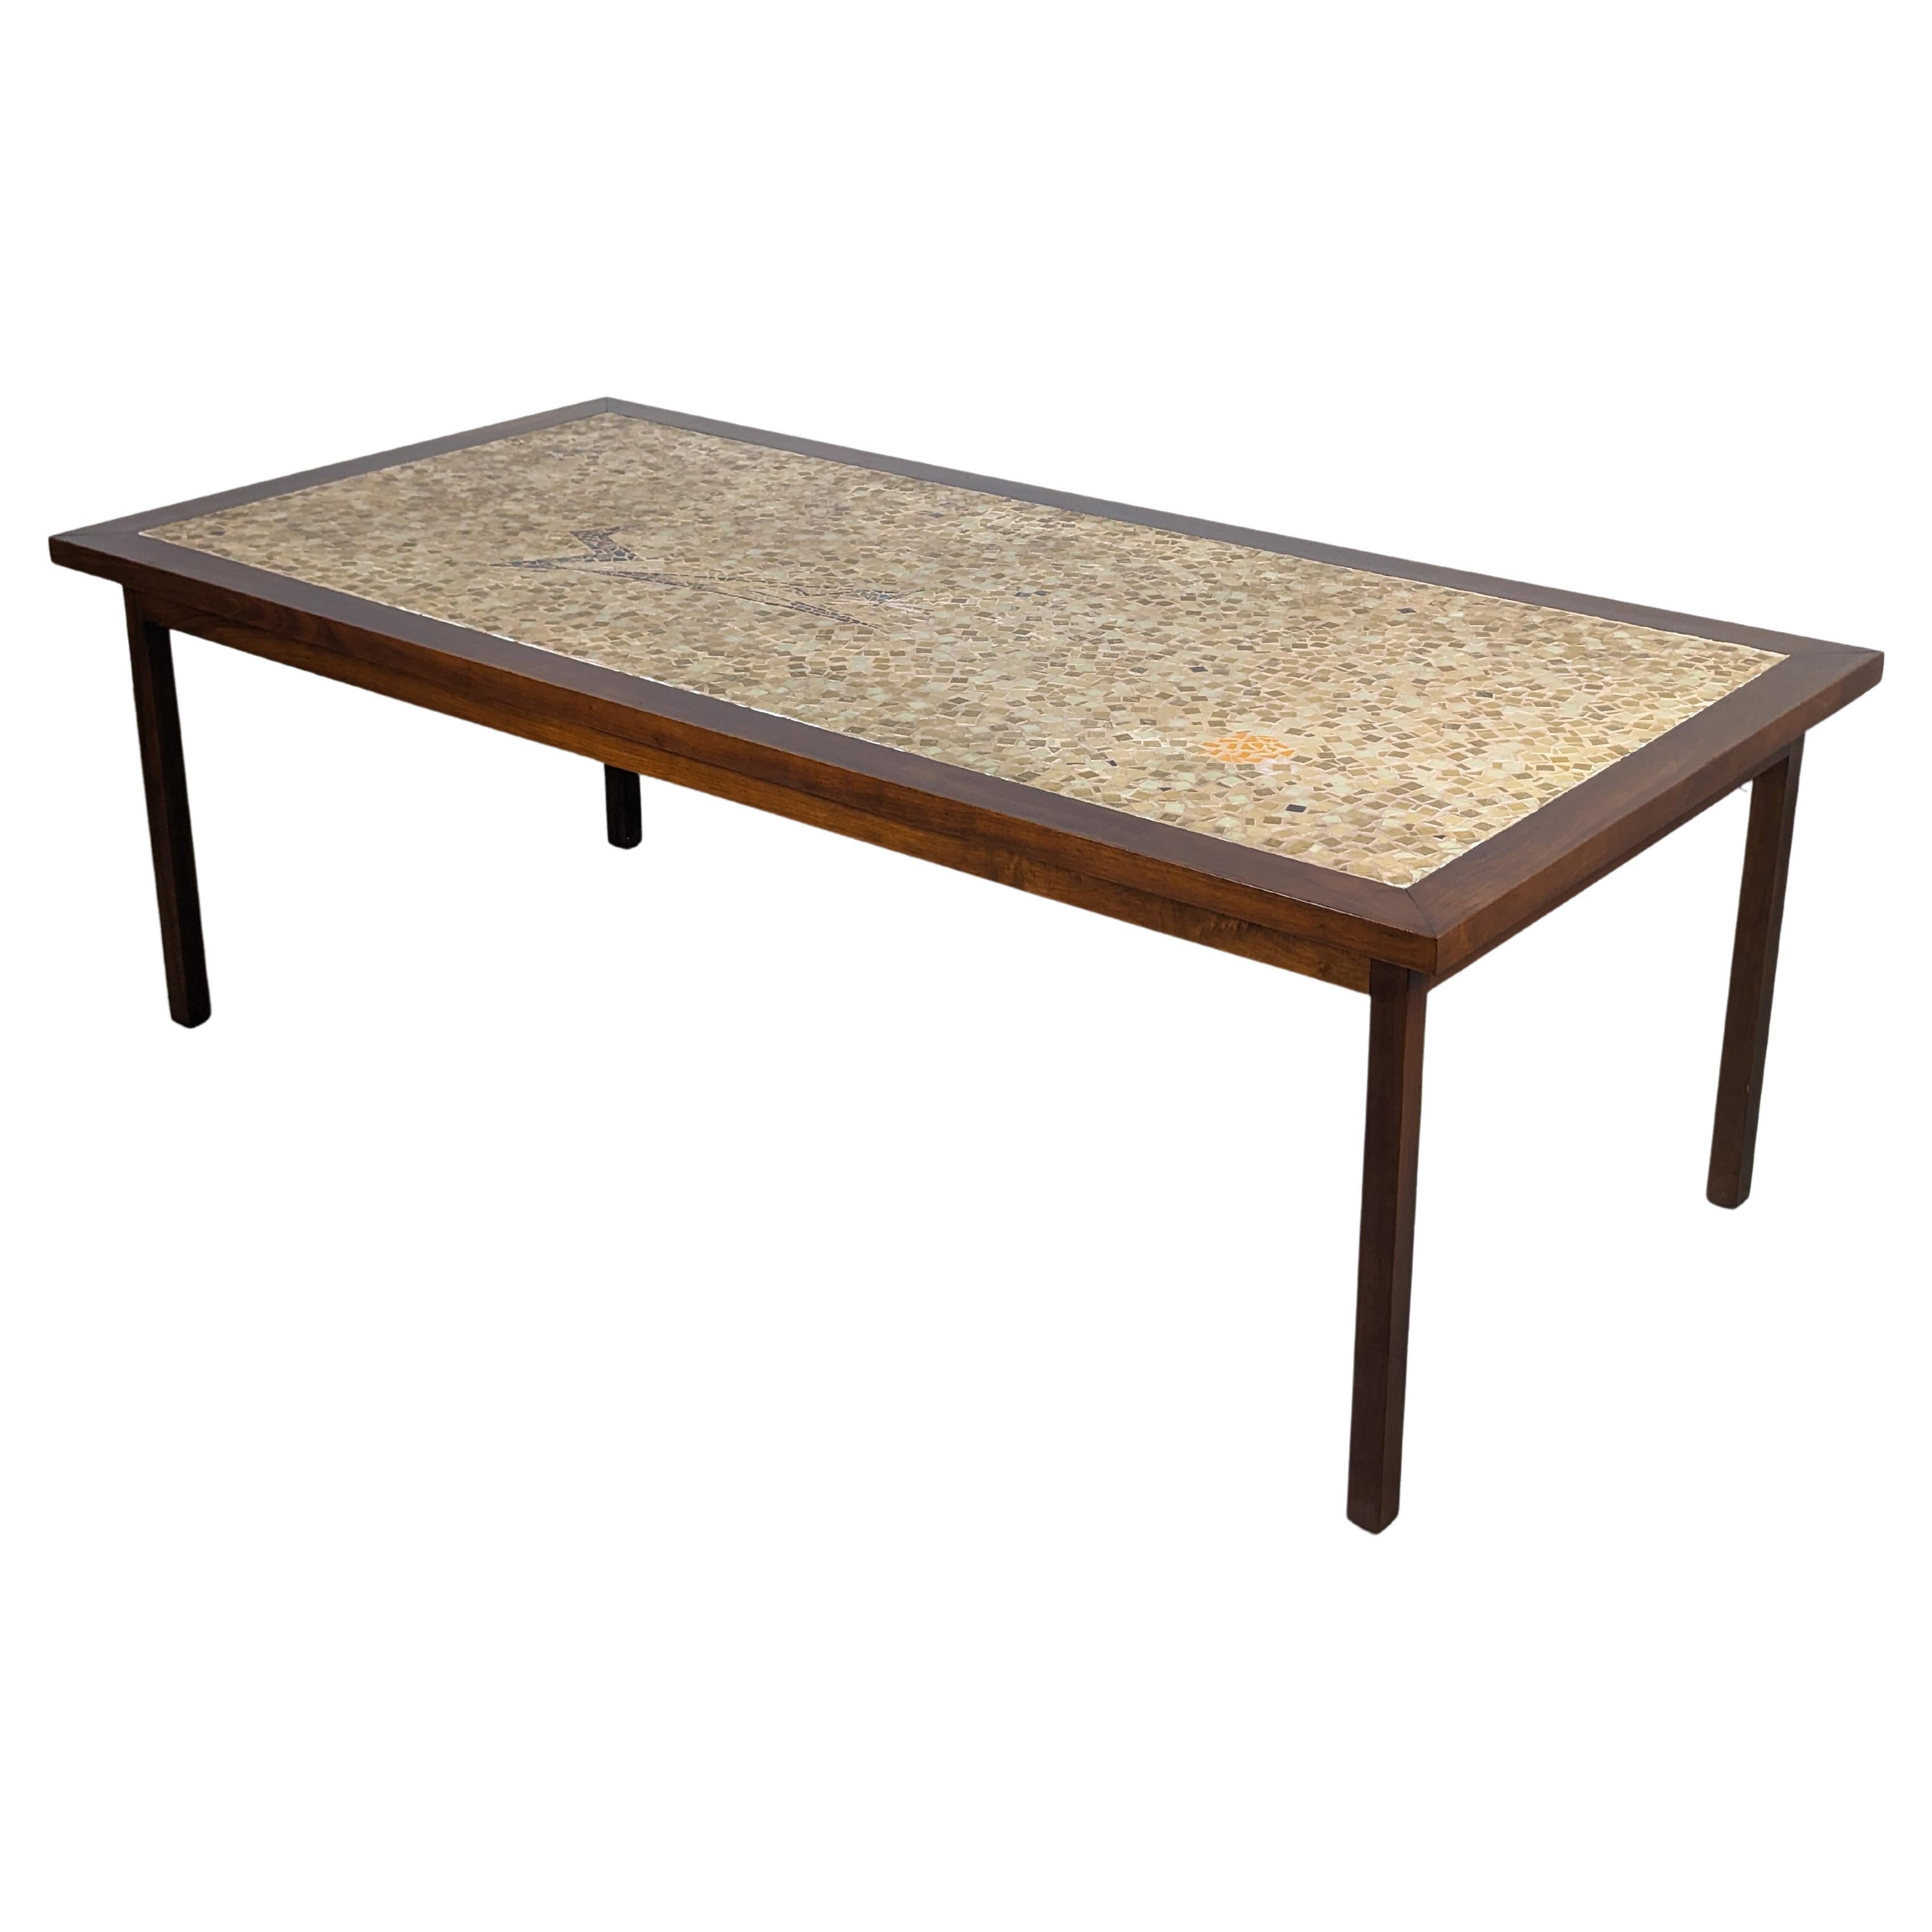 Mid Century Modern Walnut Dining Table with Mosaic Ceramic Tiled Top, c1970s For Sale